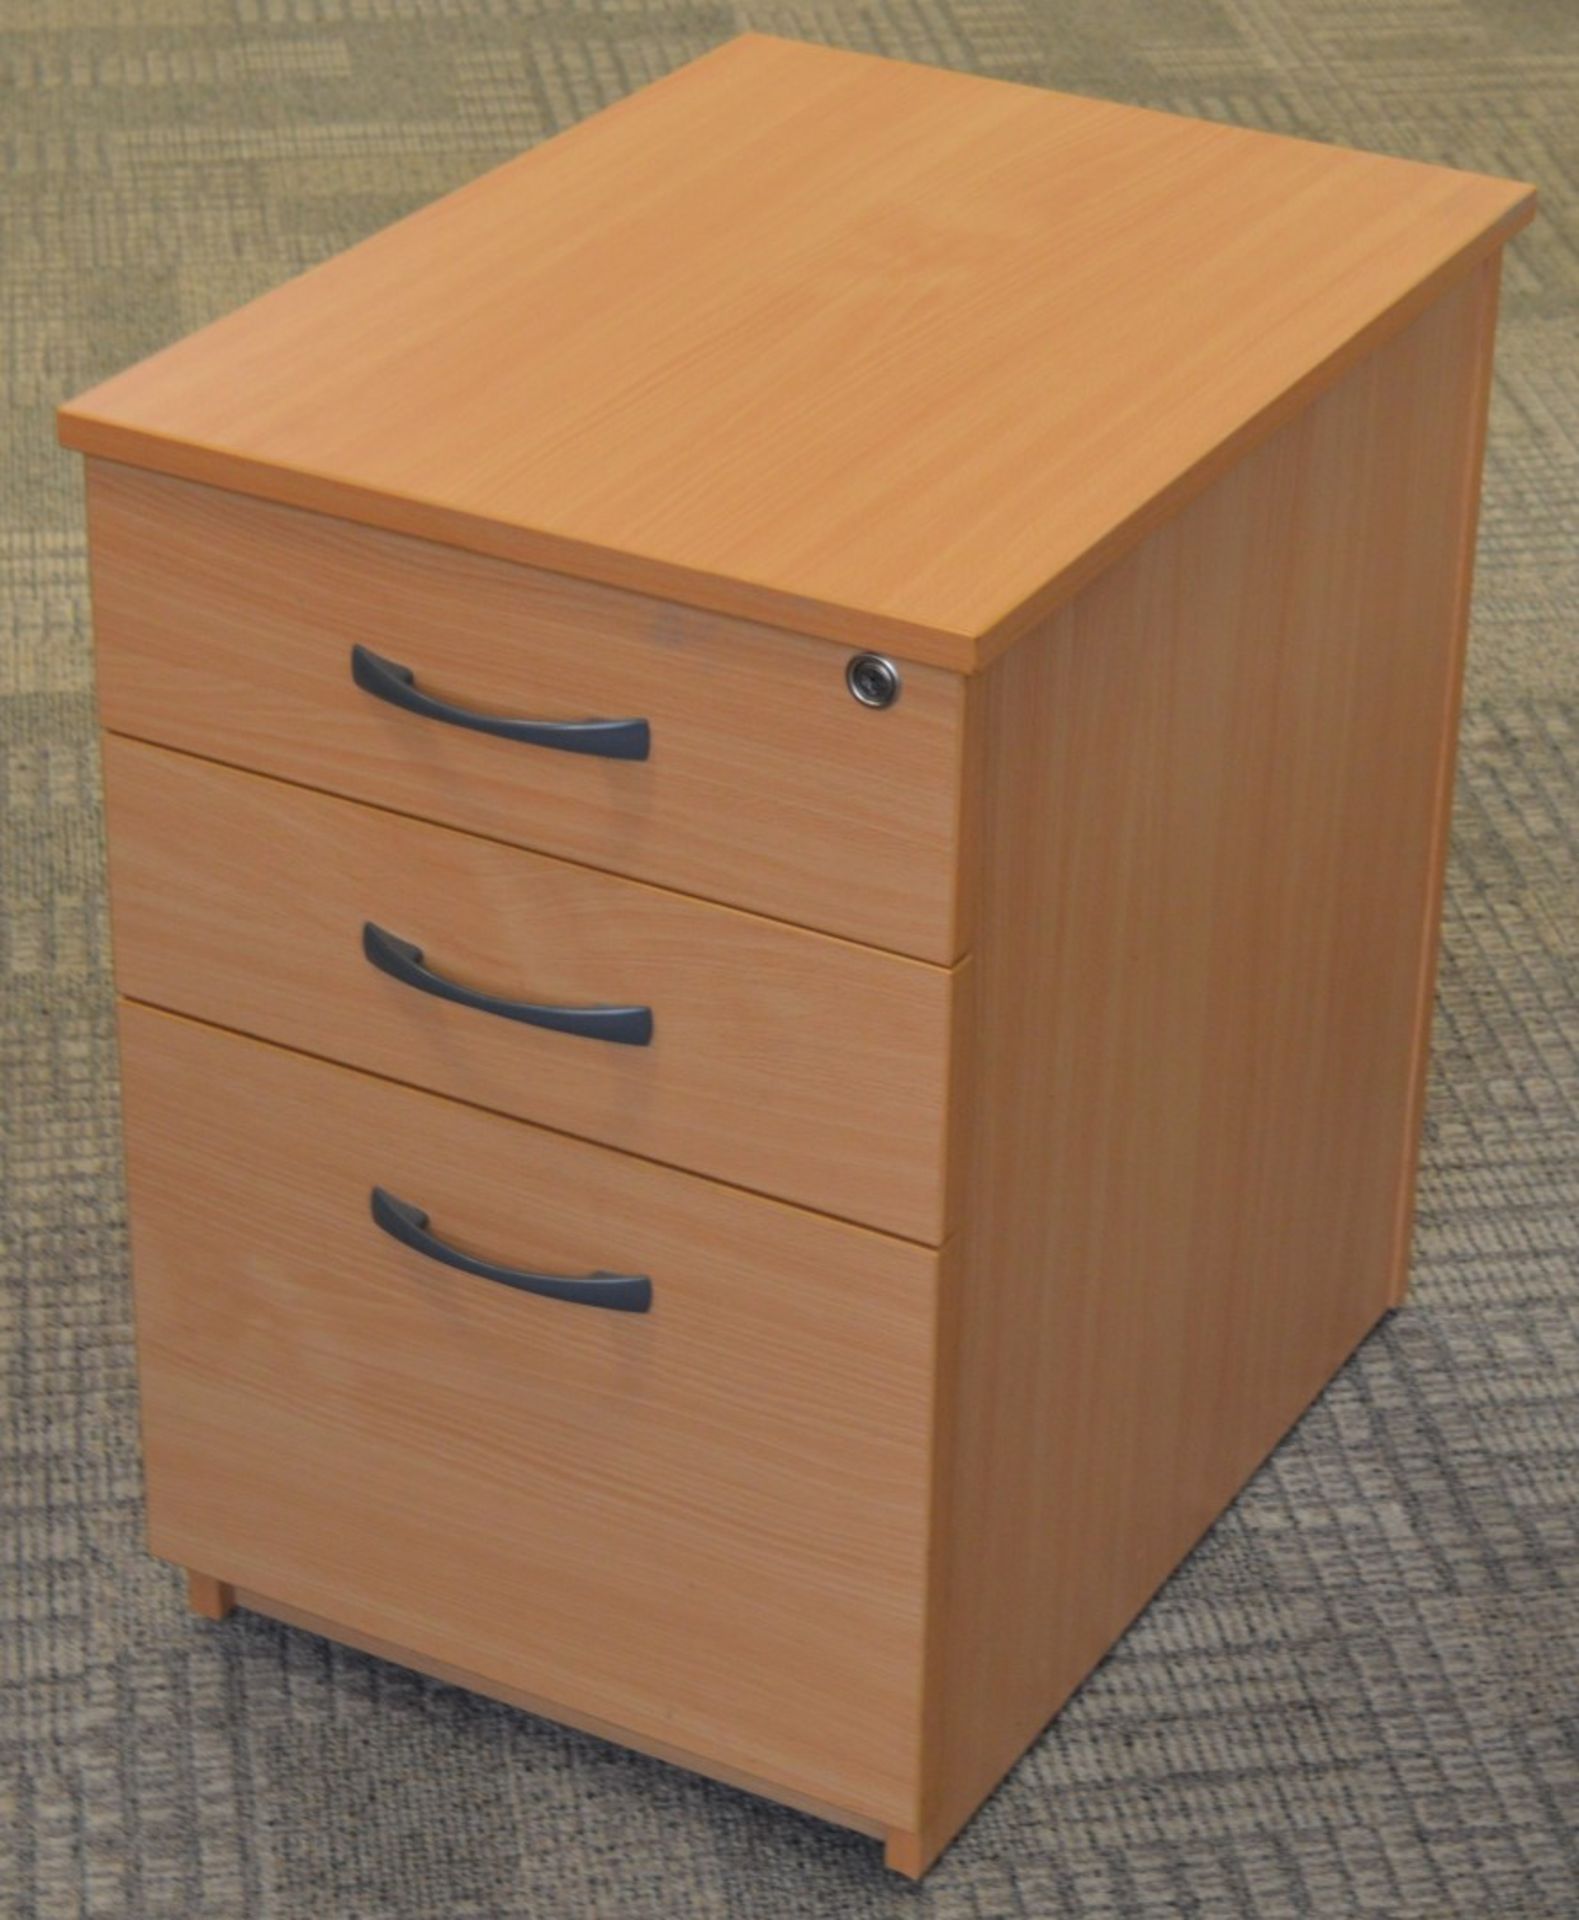 1 x Three Drawer Mobile Pedestal Drawers - With Key - Modern Beech Finish - Two Storage Drawers - Image 3 of 7